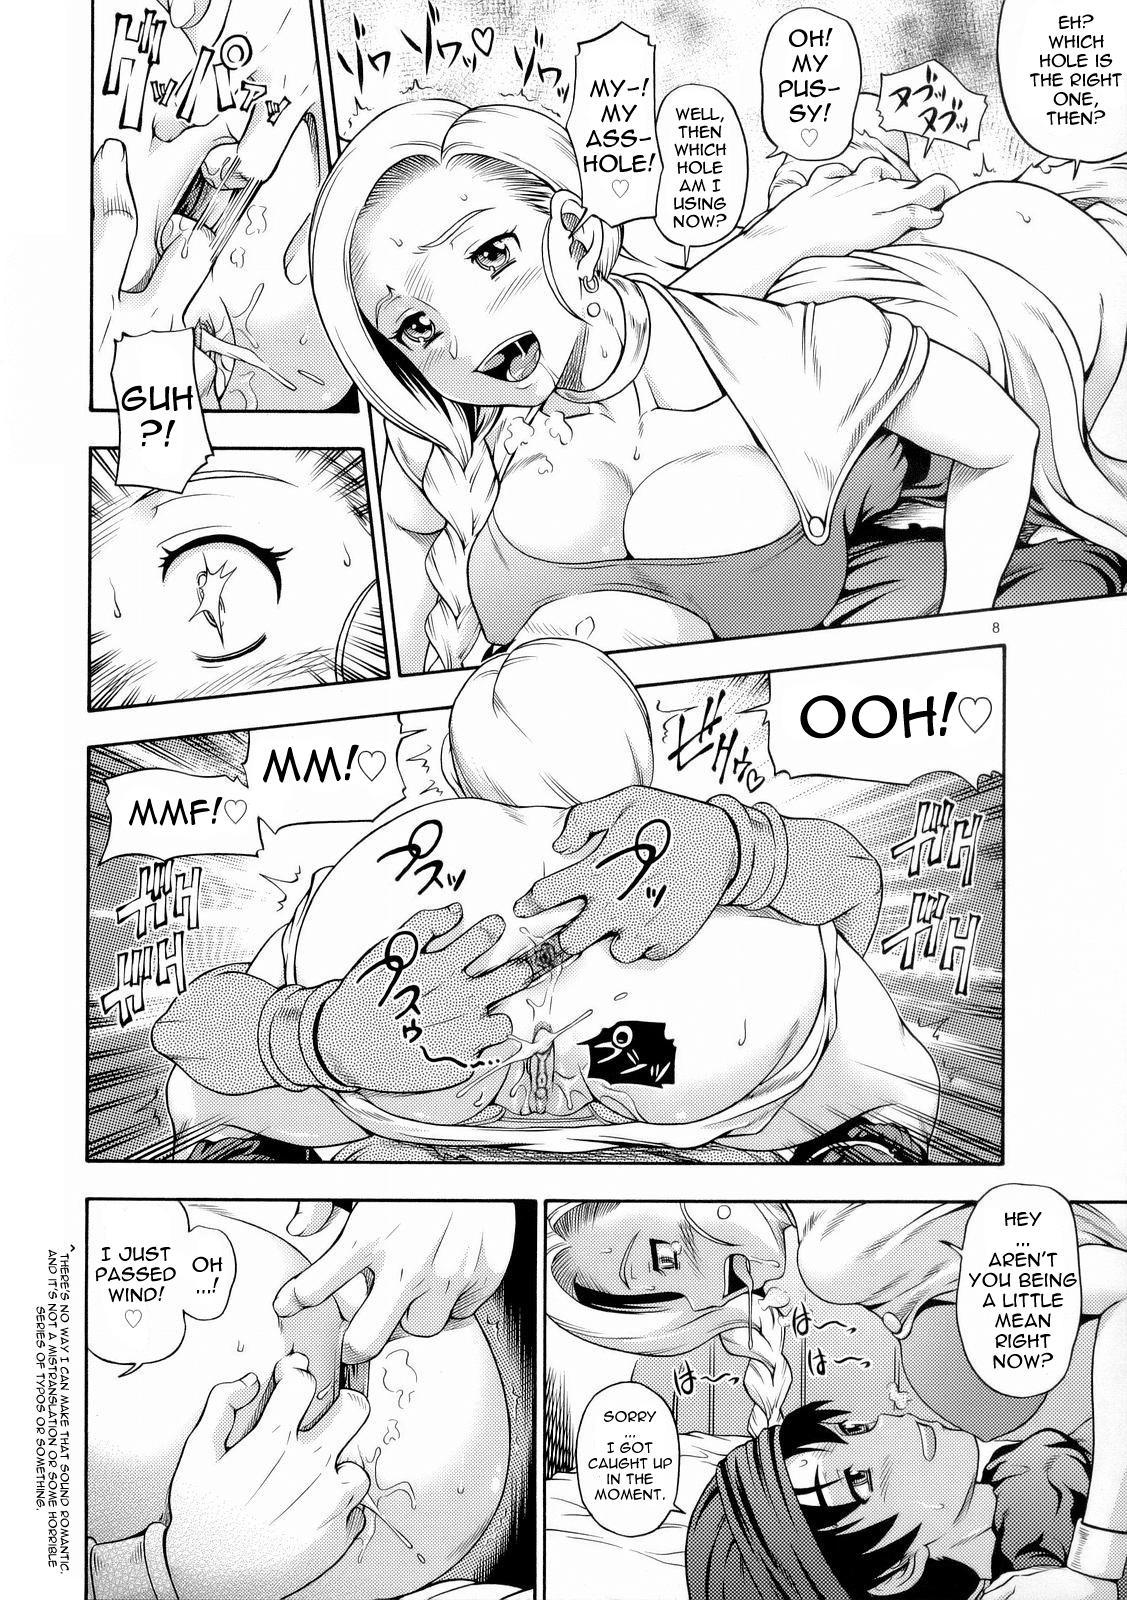 Fuck Pussy Bianca Milk 5.1 - Dragon quest v Mmf - Page 6